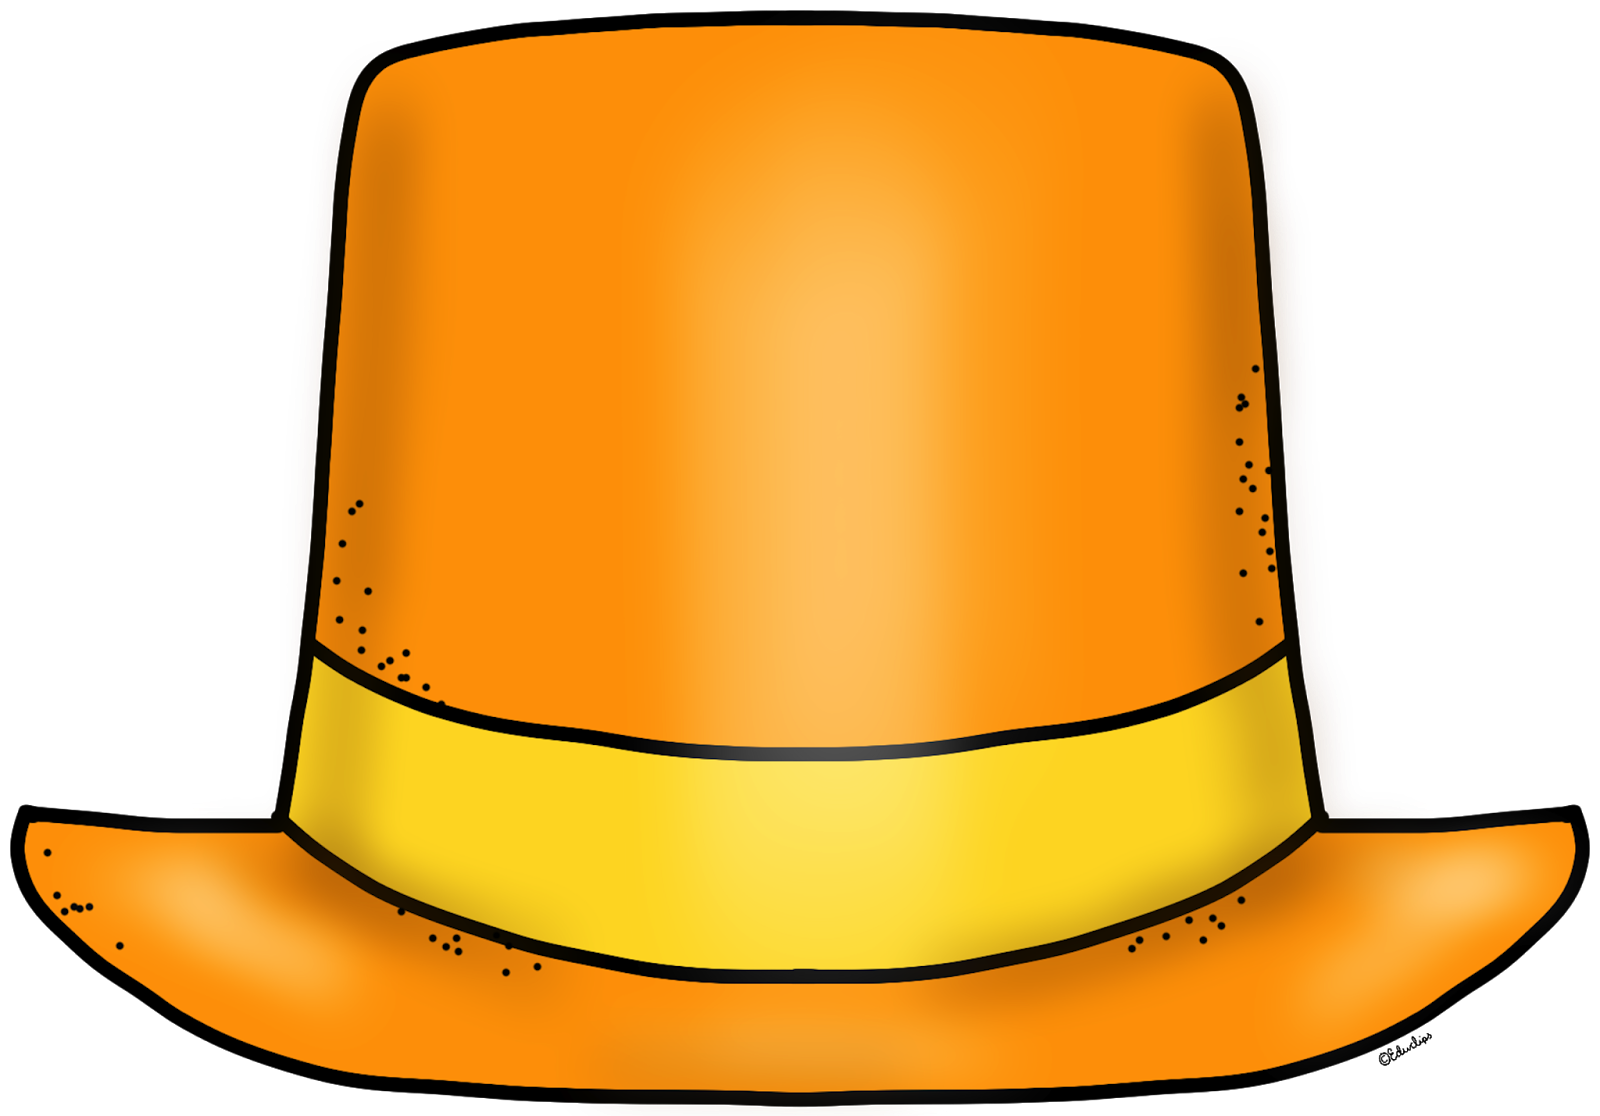 Free stylish man in top hat clipart clipart image image